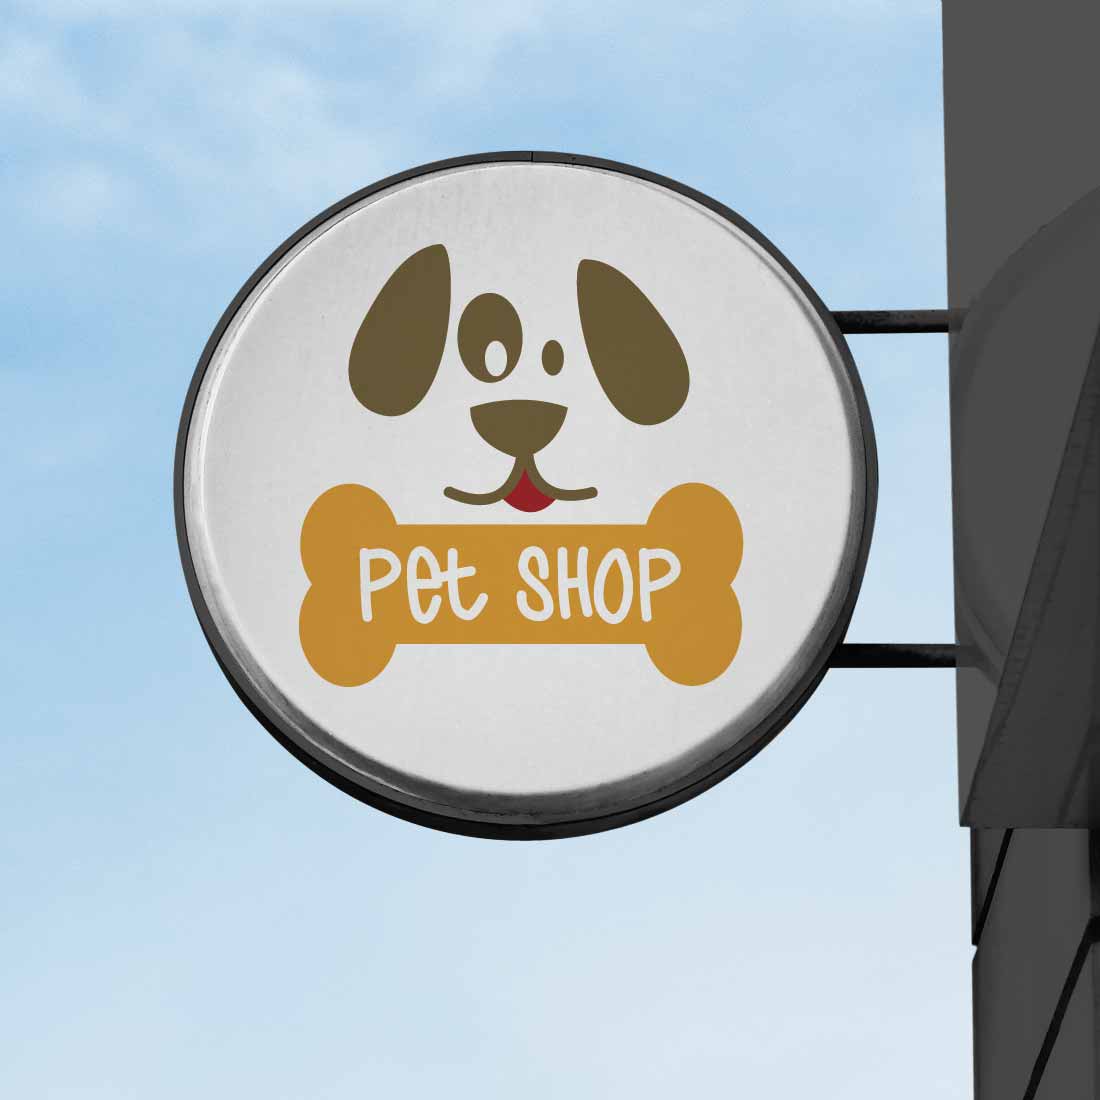 Dog and bone logo for petshop or veterinary preview image.